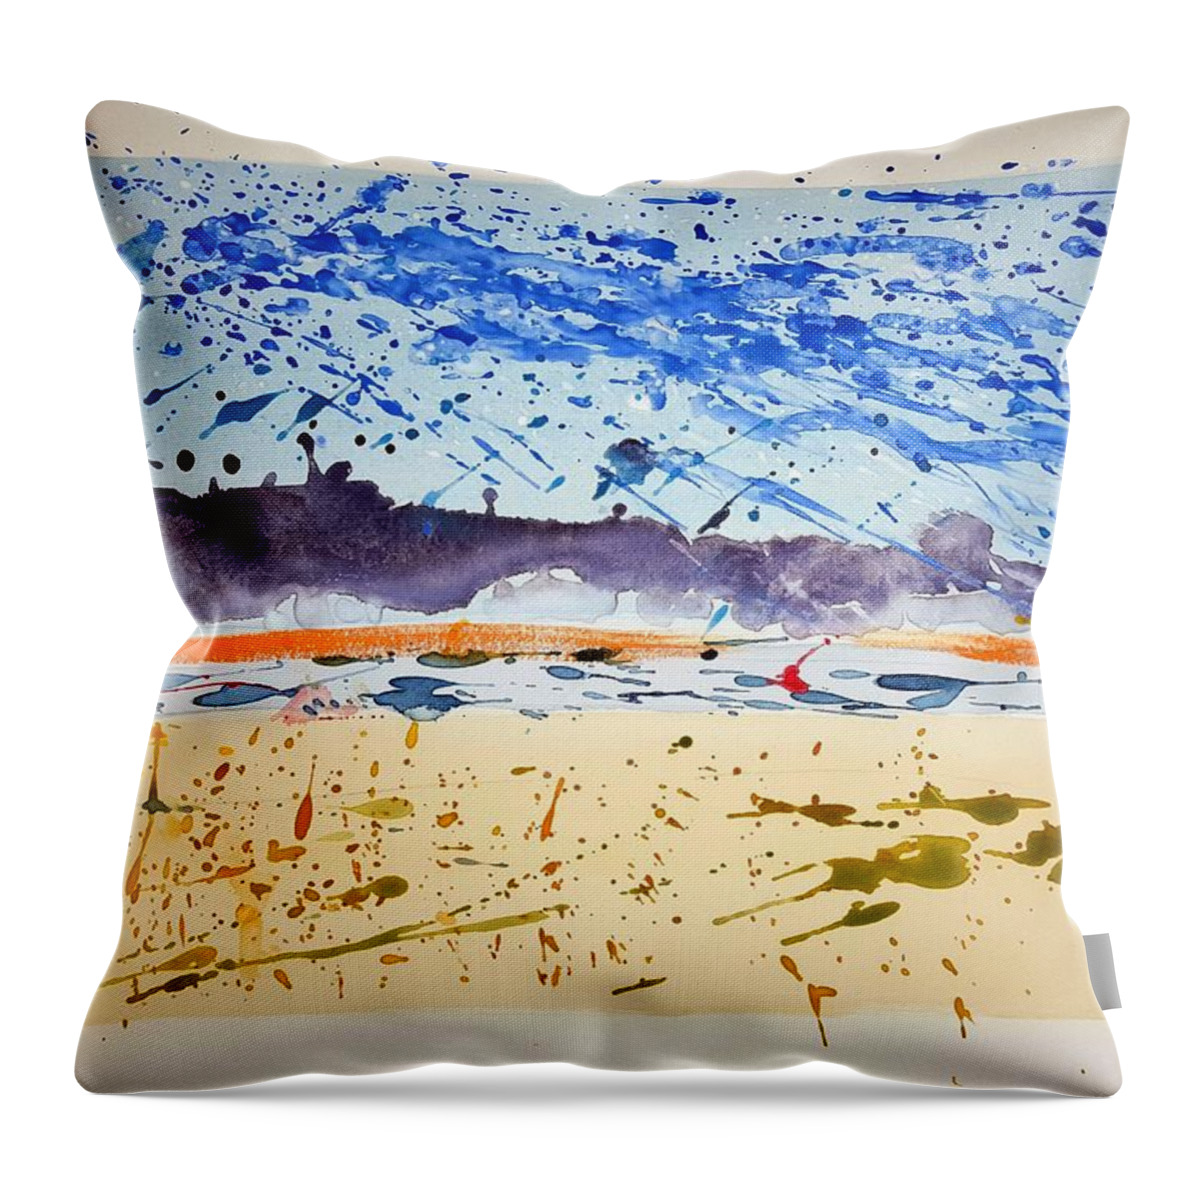 Watercolor Throw Pillow featuring the painting Chatham Harbor by John Klobucher